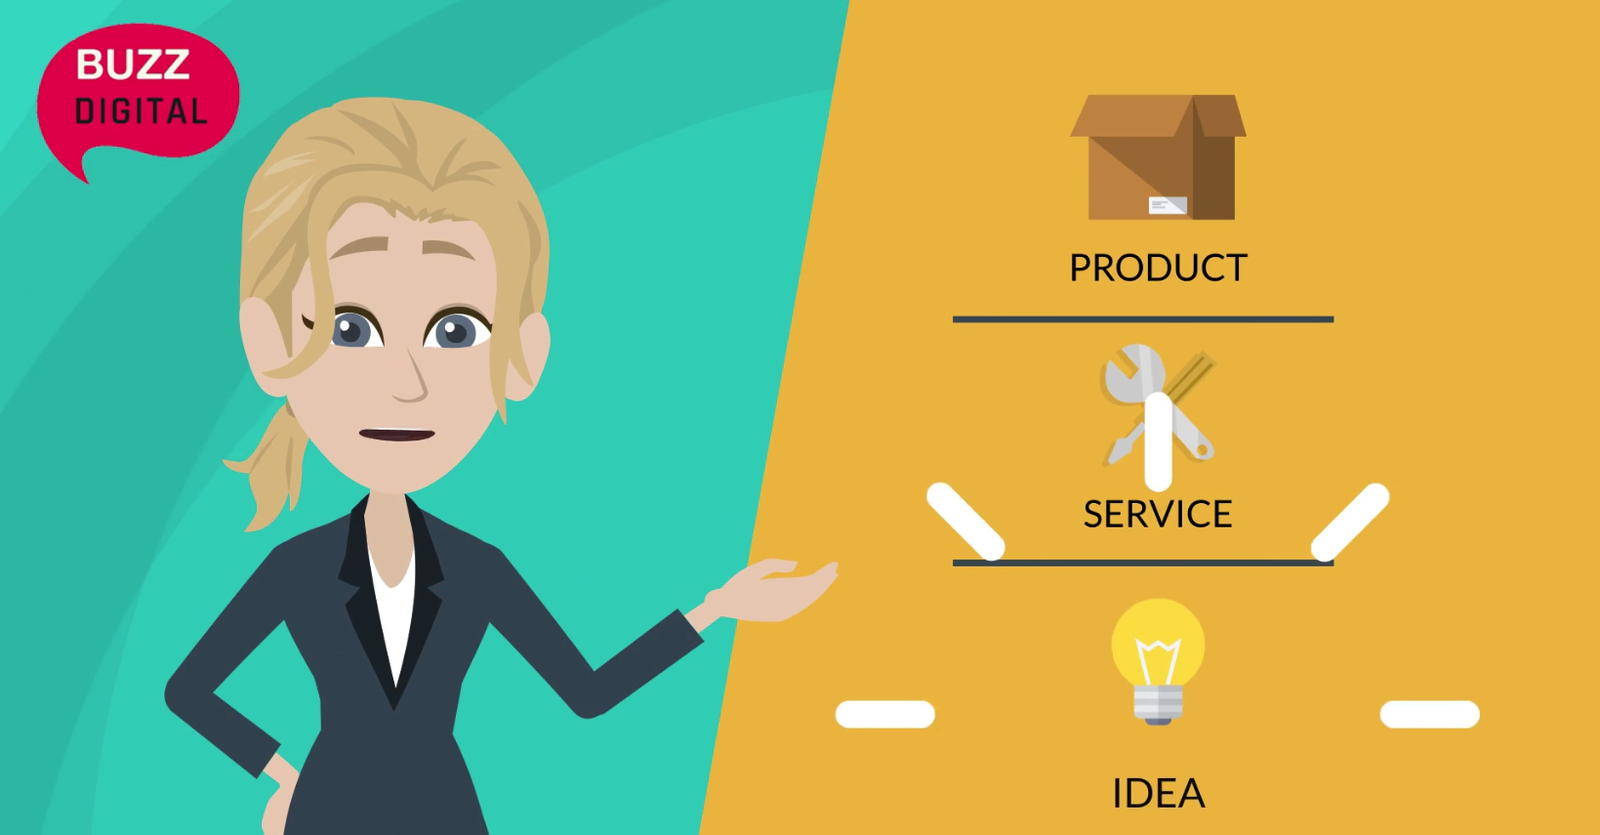 Why Use Animated Explainer Video for Your Business?